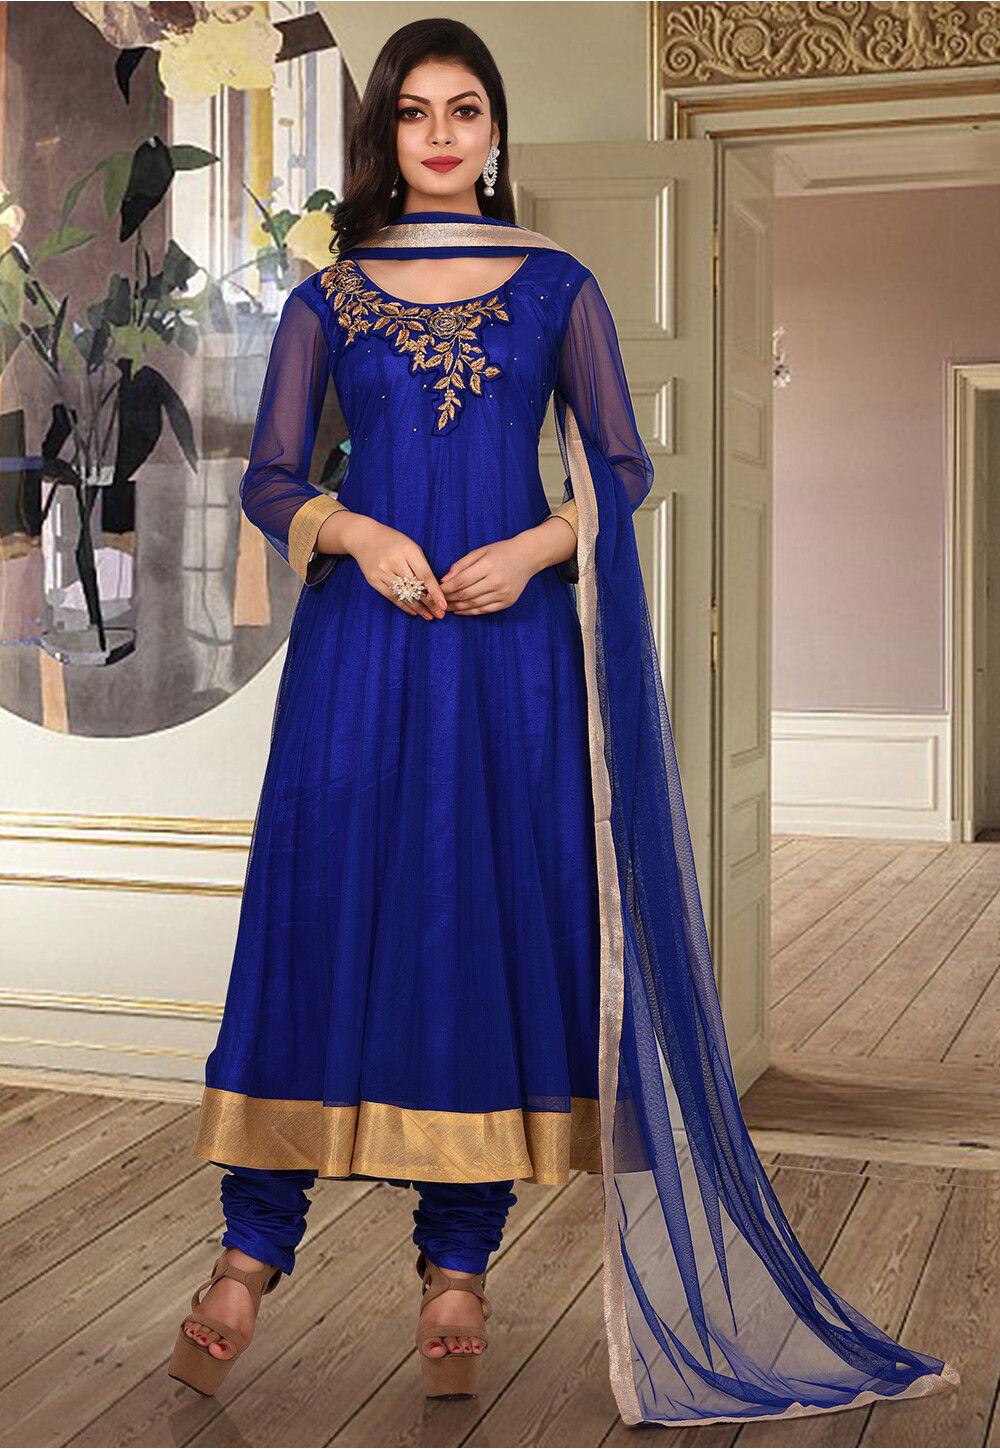 Flexible Stylish Printed Pattern Navy Blue Frock Anarkali Suit With Short  Sleeves Decoration Material Laces at Best Price in Mathura  Laxman  Chaudhary